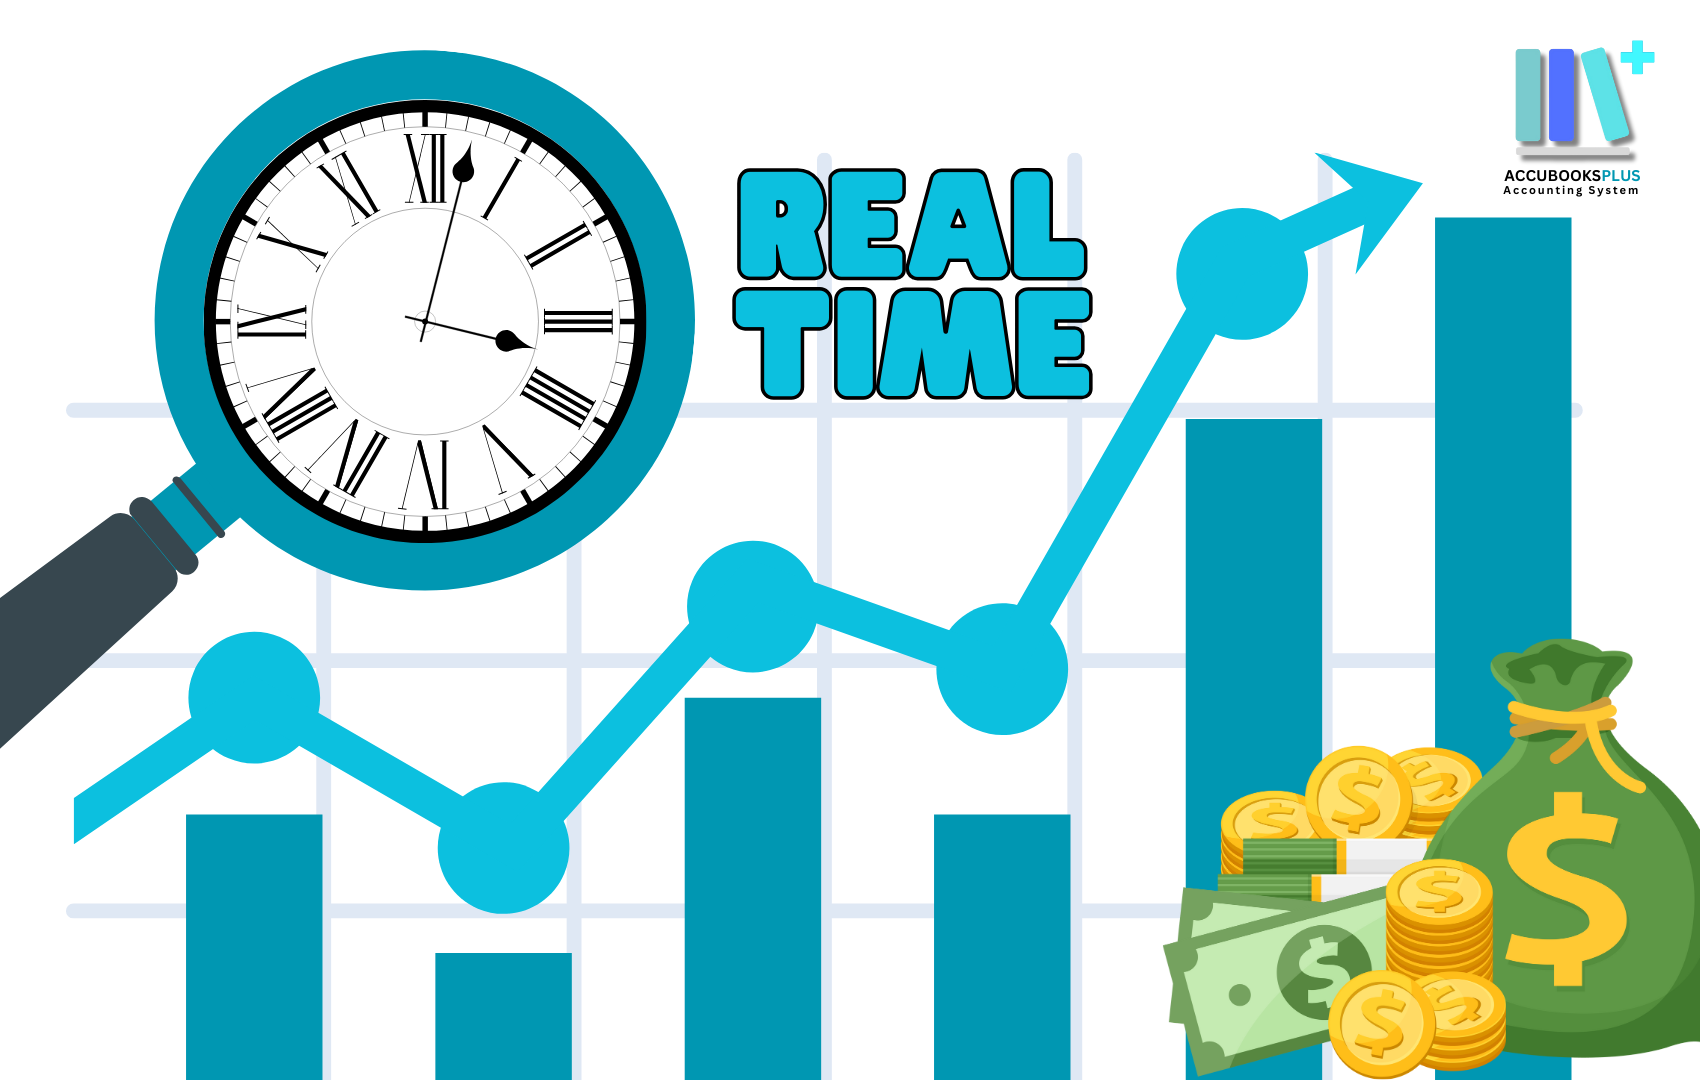 Real Time Financial Data Access in Online Accounting Systems